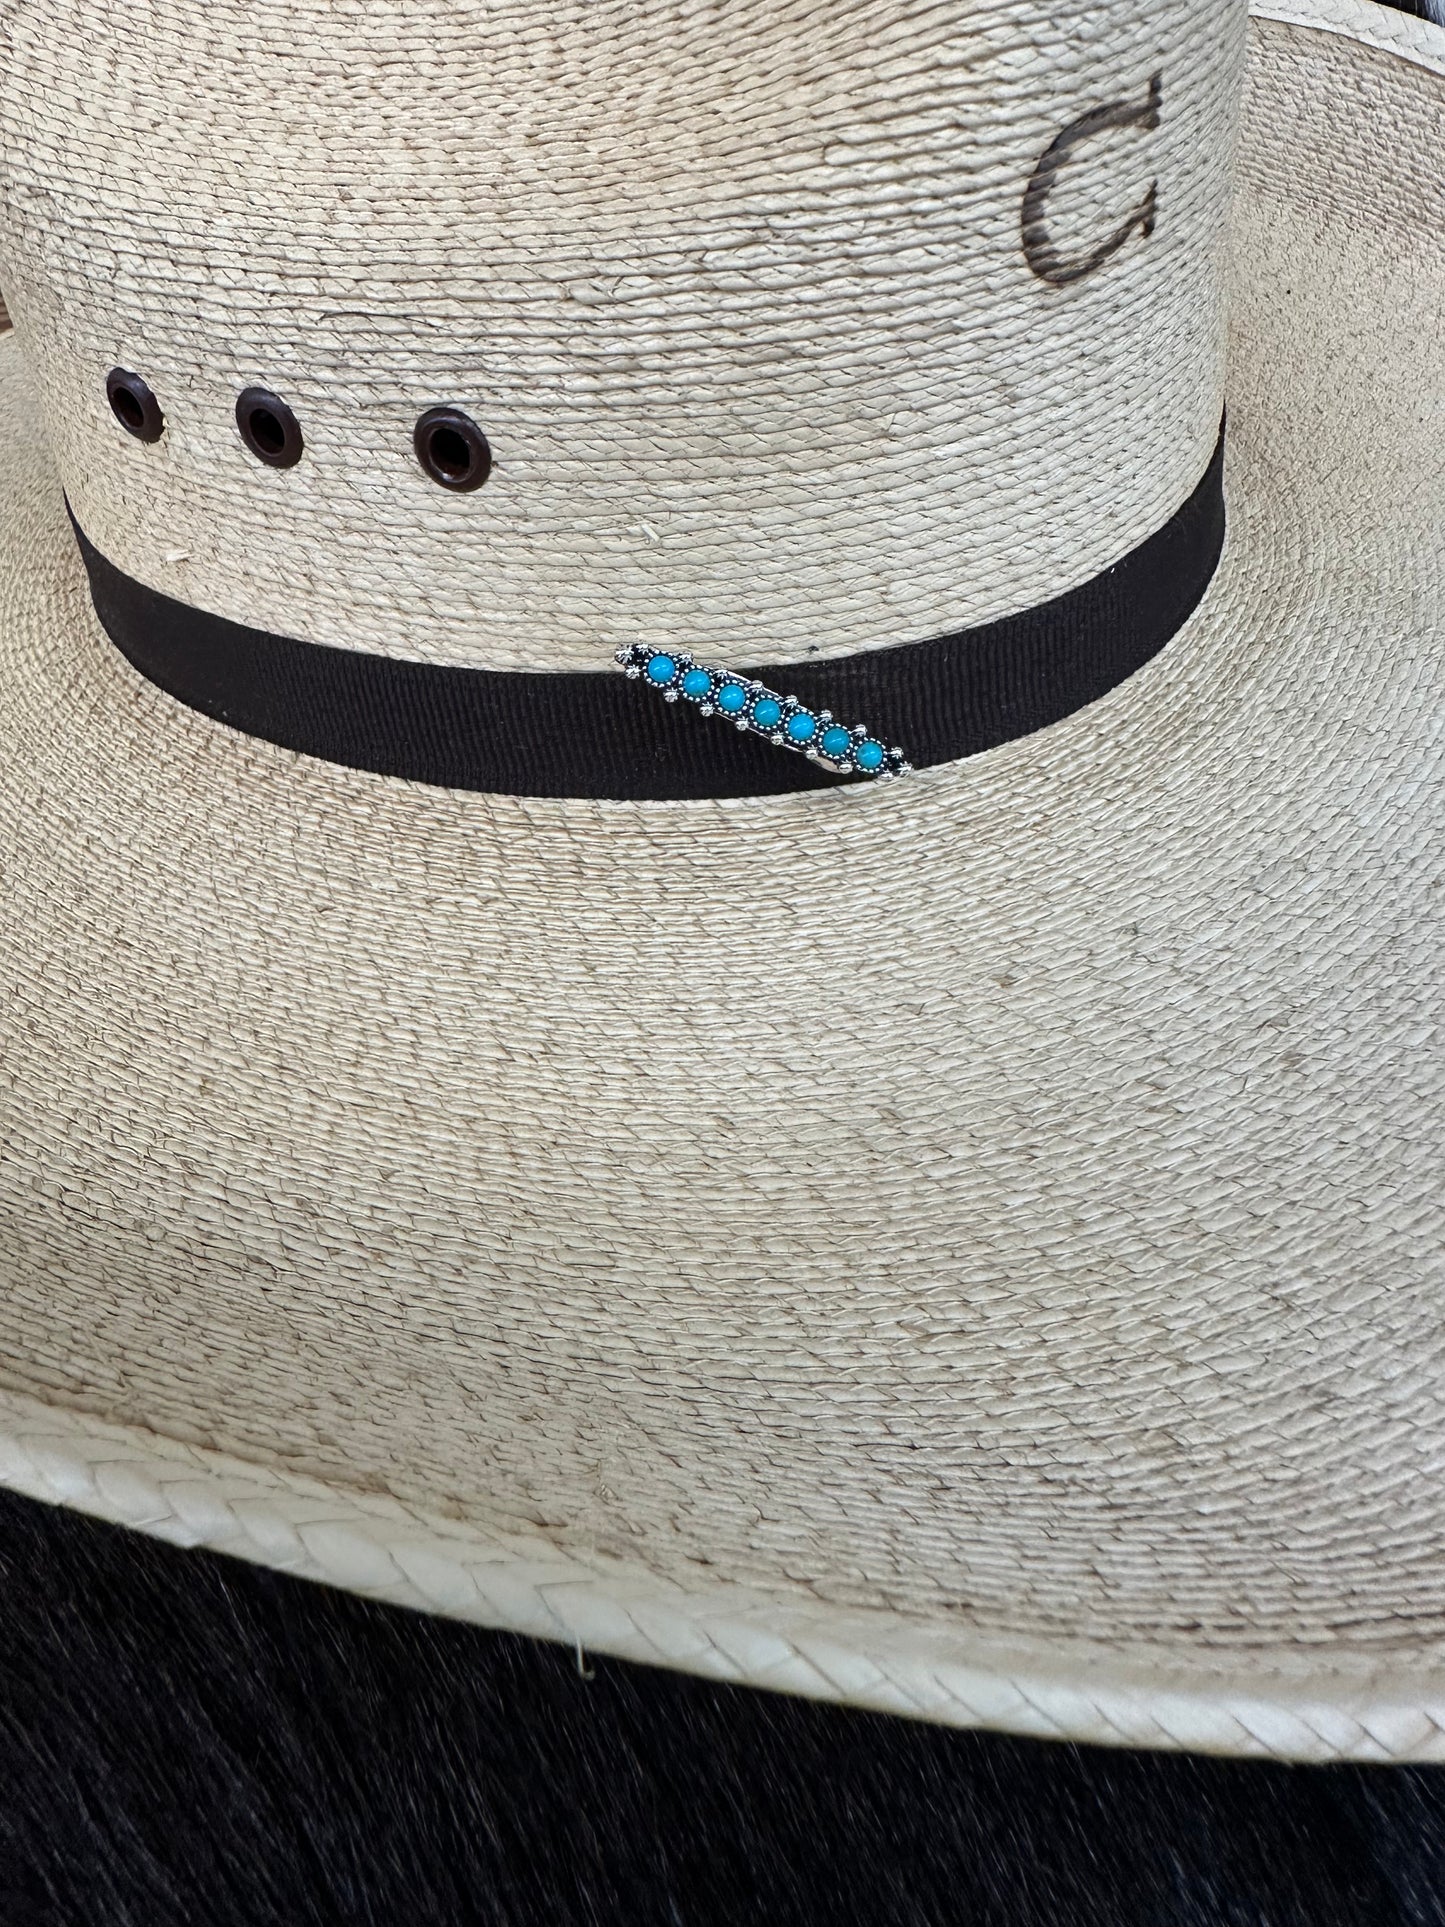 The Color Me Turquoise Hat Pin